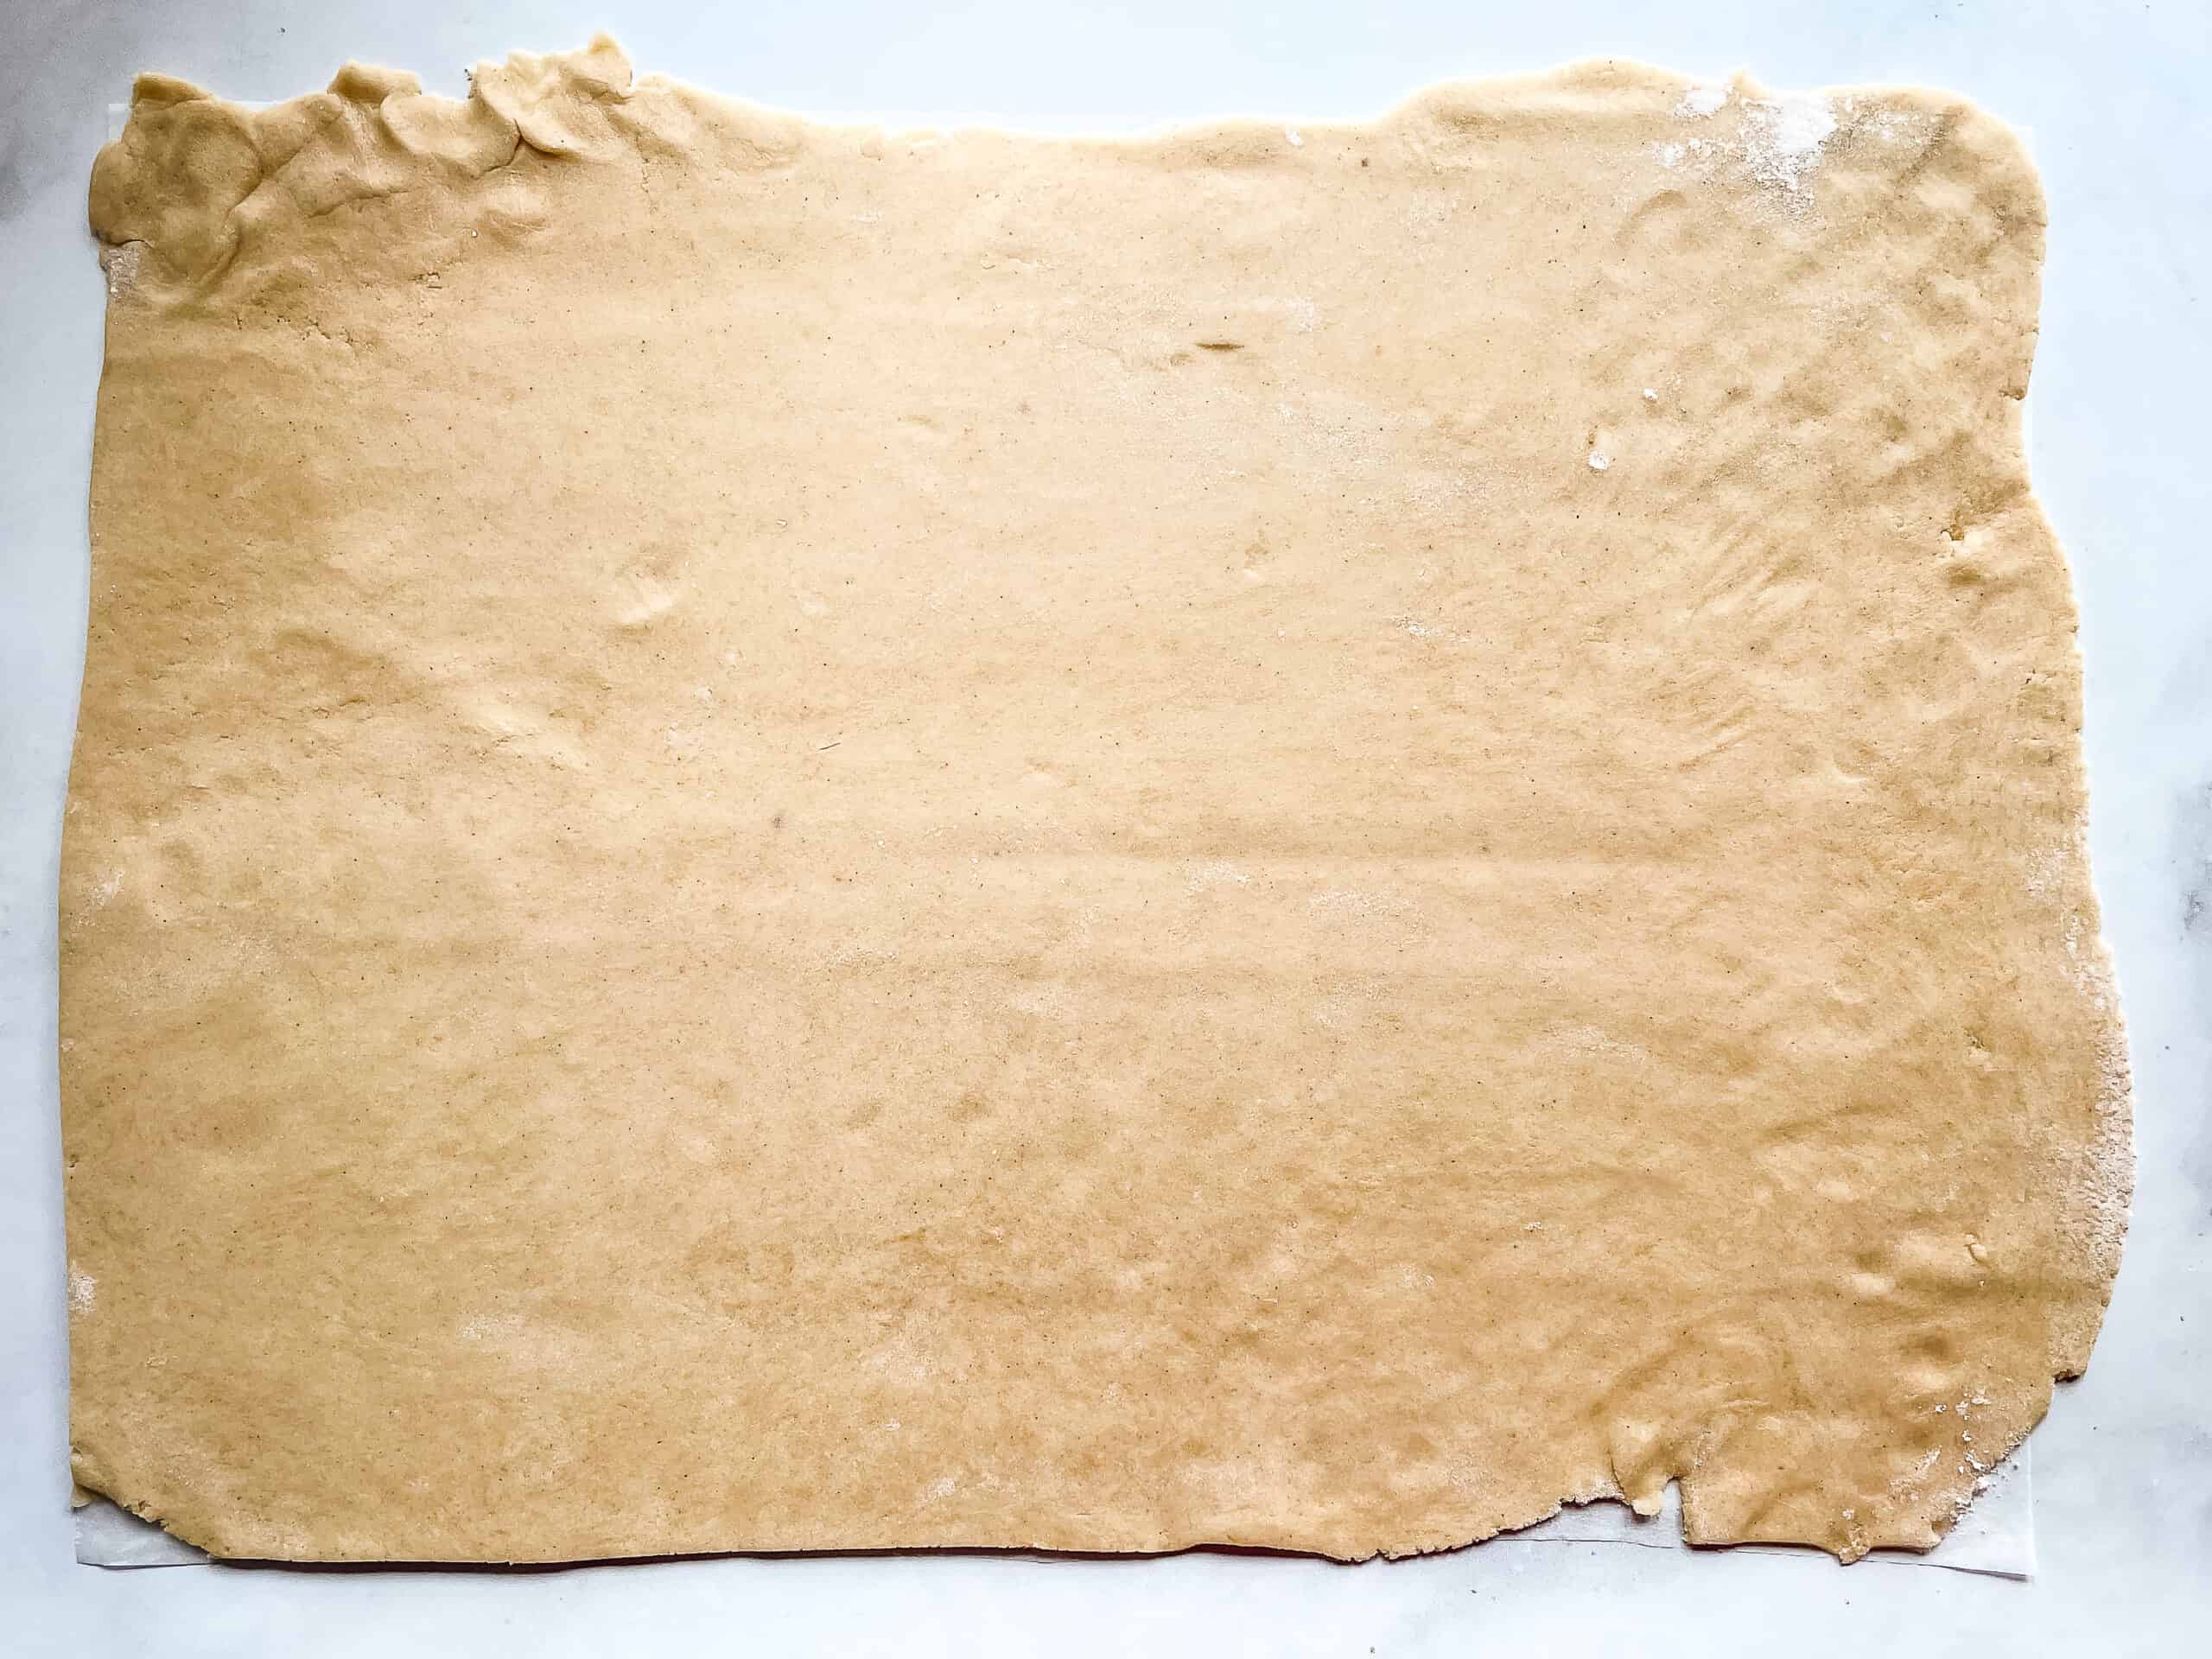 Gluten-free graham cracker dough rolled out into a large sheet.